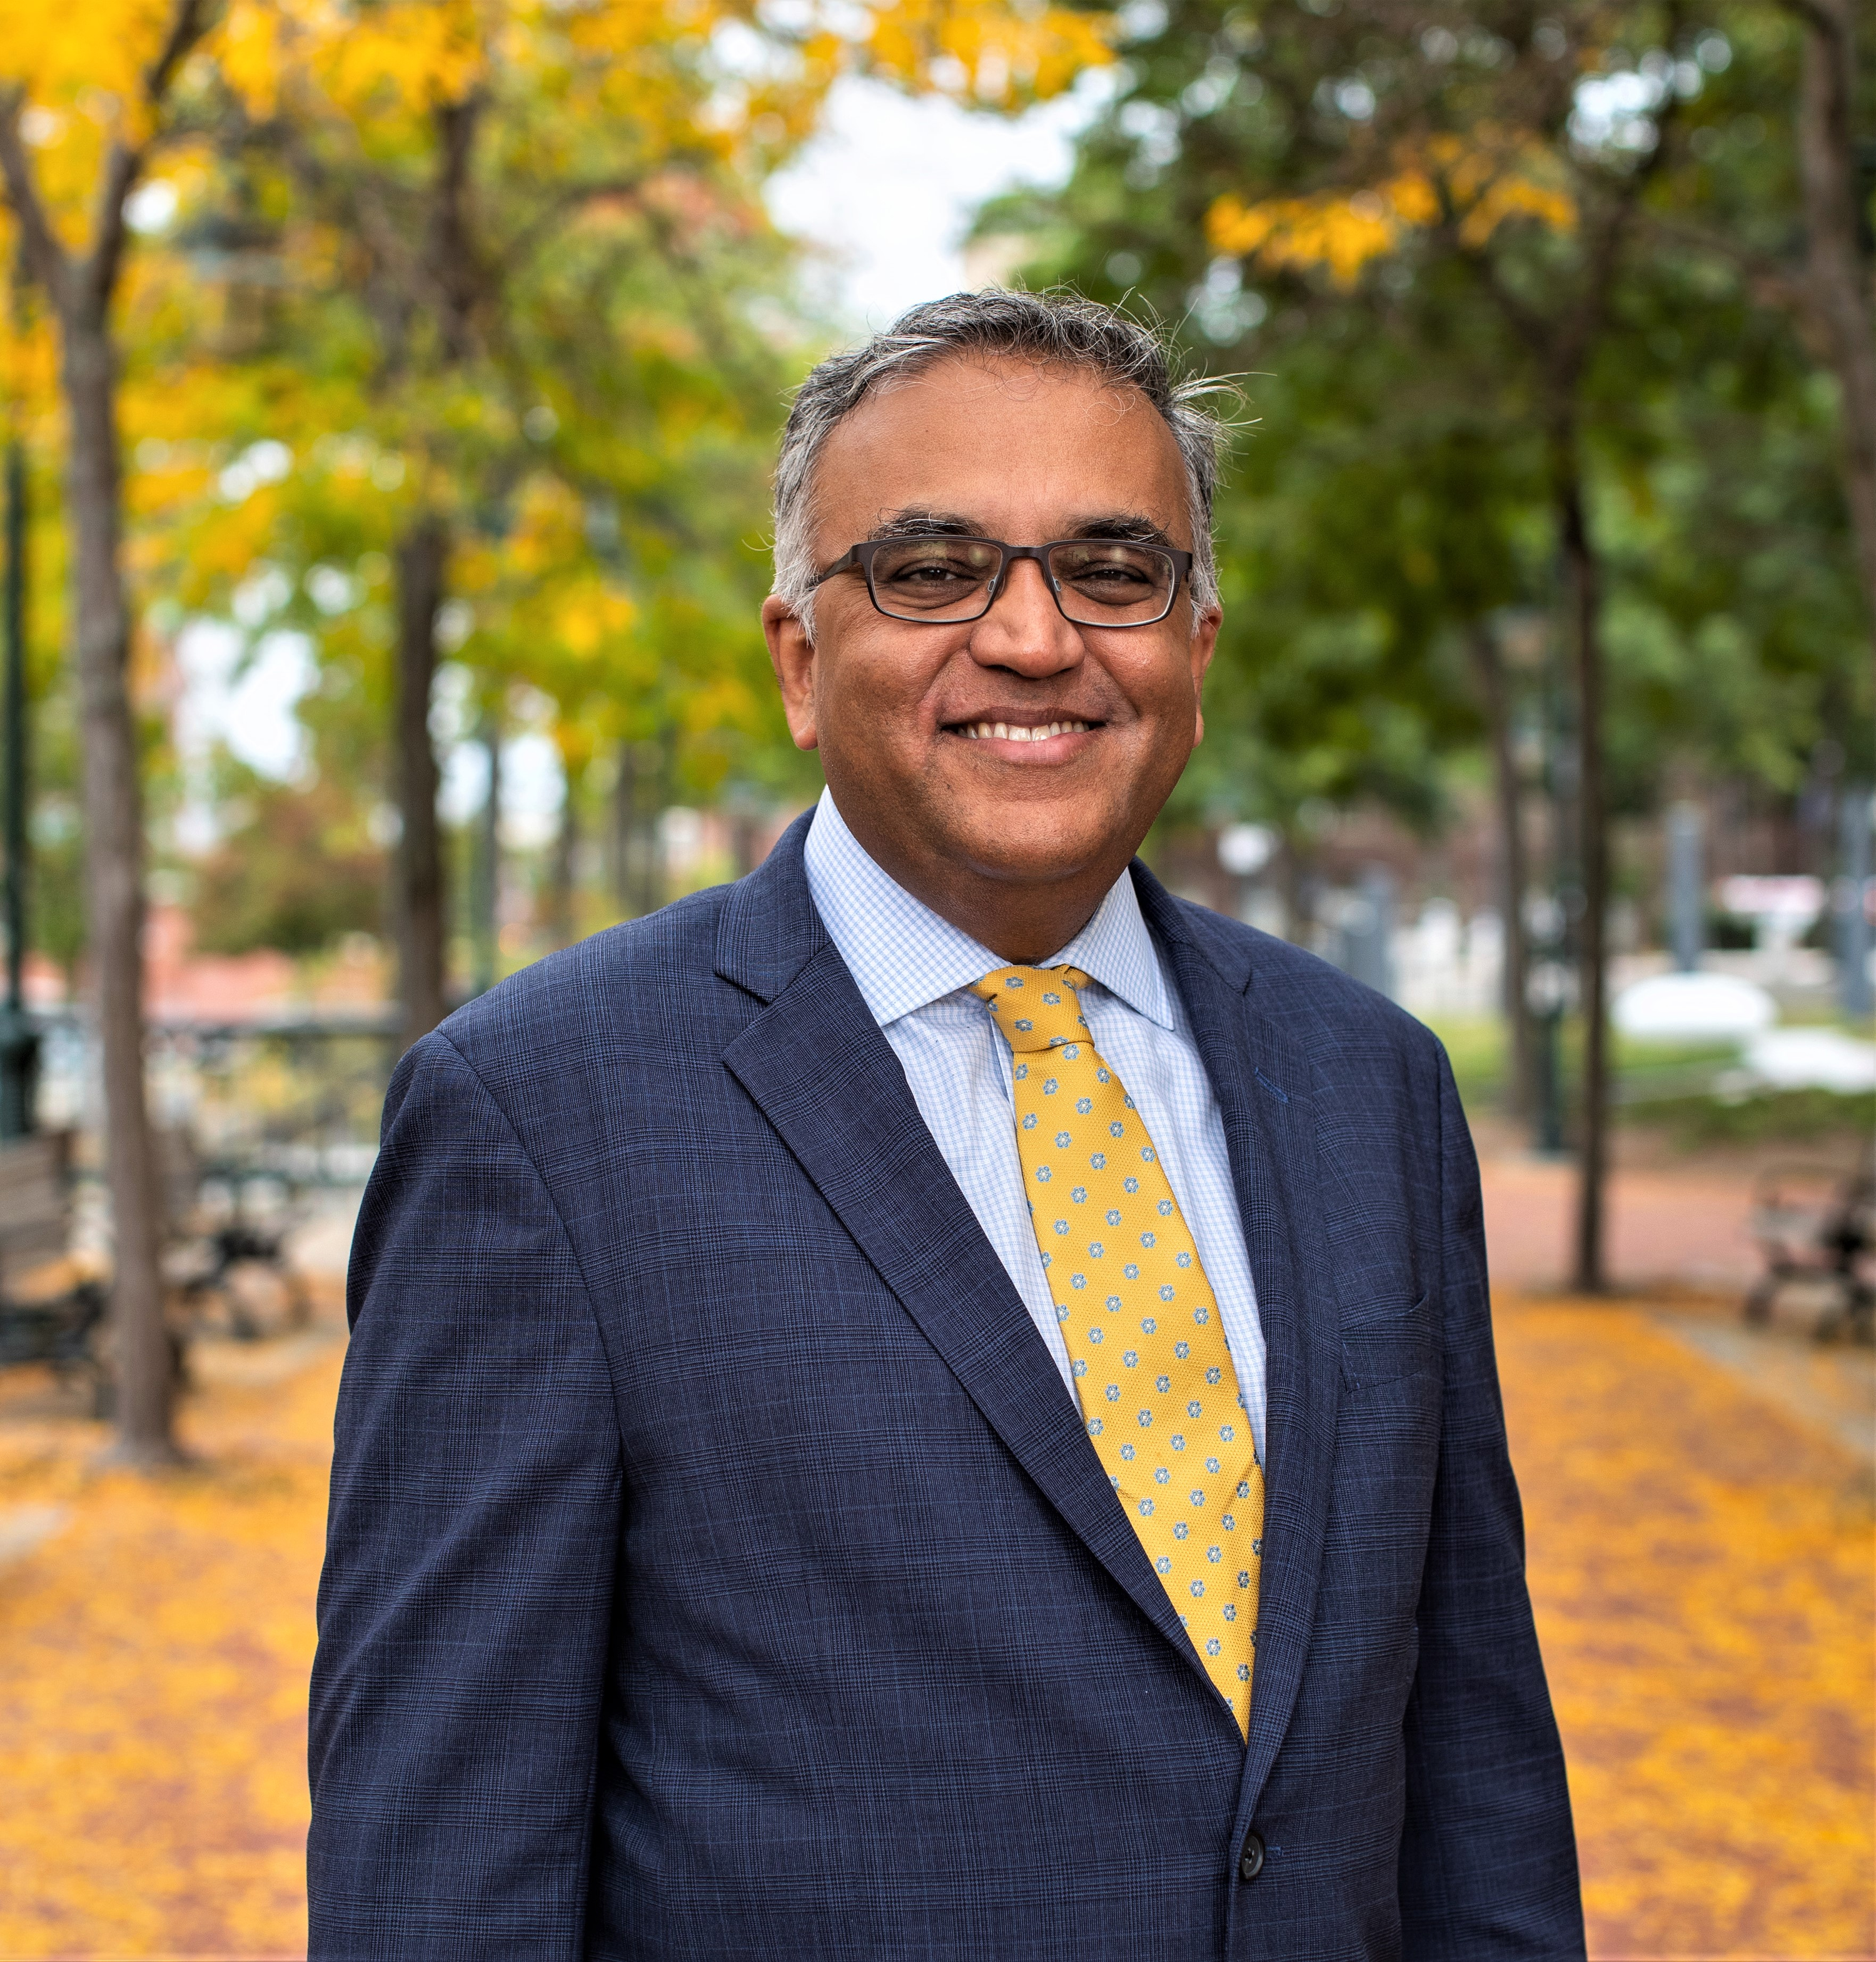 Welcome to Episode 7 of “COVID: What comes next,” an exclusive weekly Providence Journal/USA TODAY NETWORK podcast featuring Dr. Ashish Jha, dean of the Brown University School of Public Health and an internationally respected expert on pandemic response and preparedness.